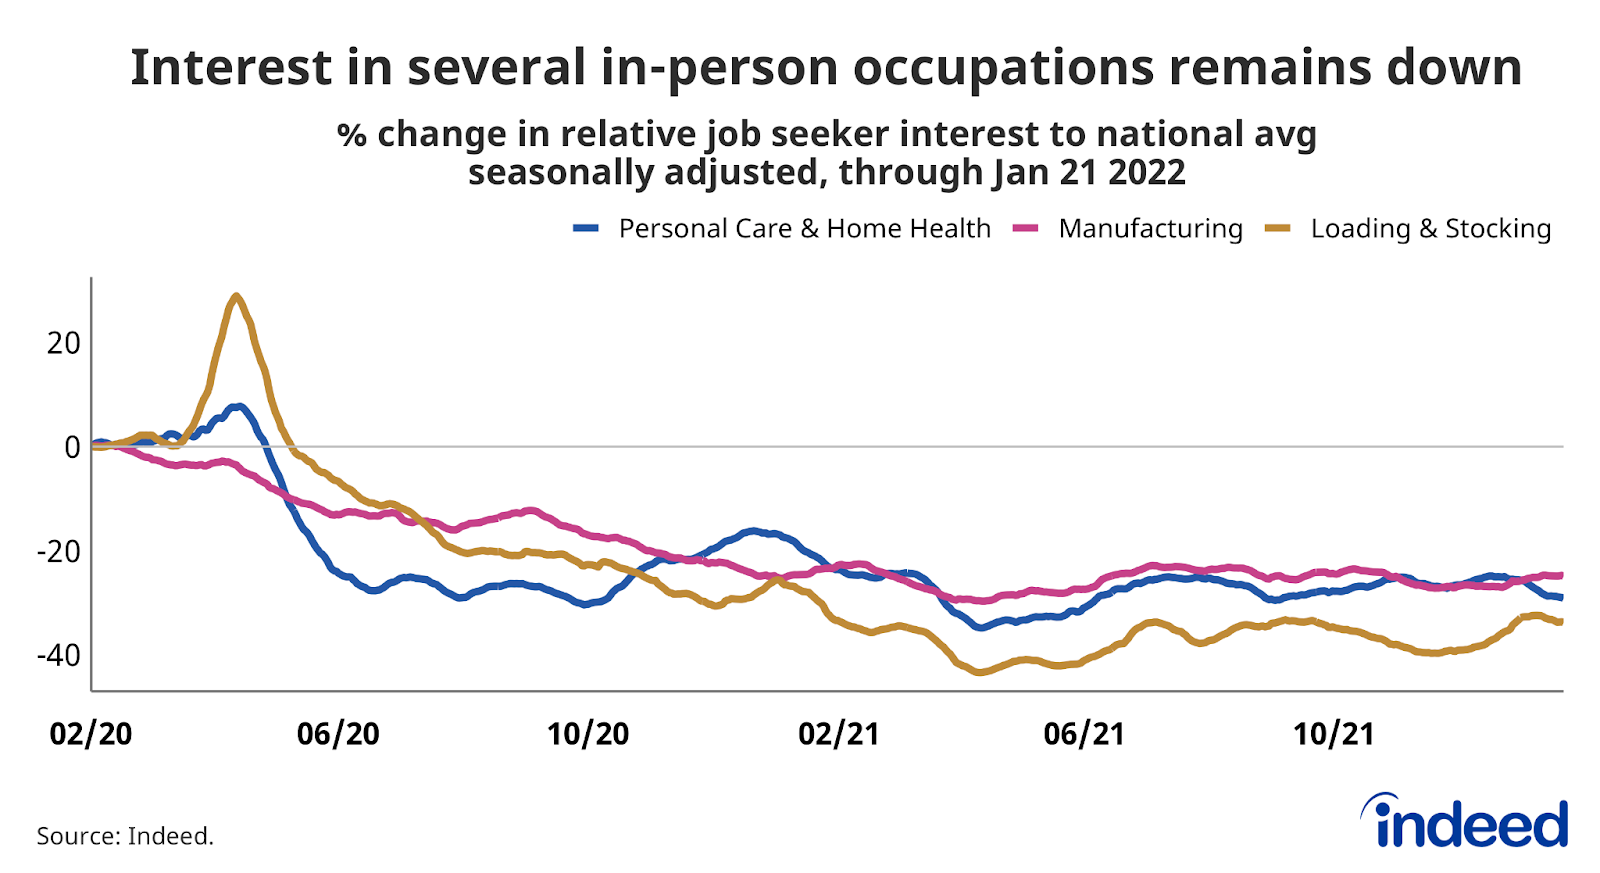 Line graph titled “Interest in several in-person occupations remains down.”